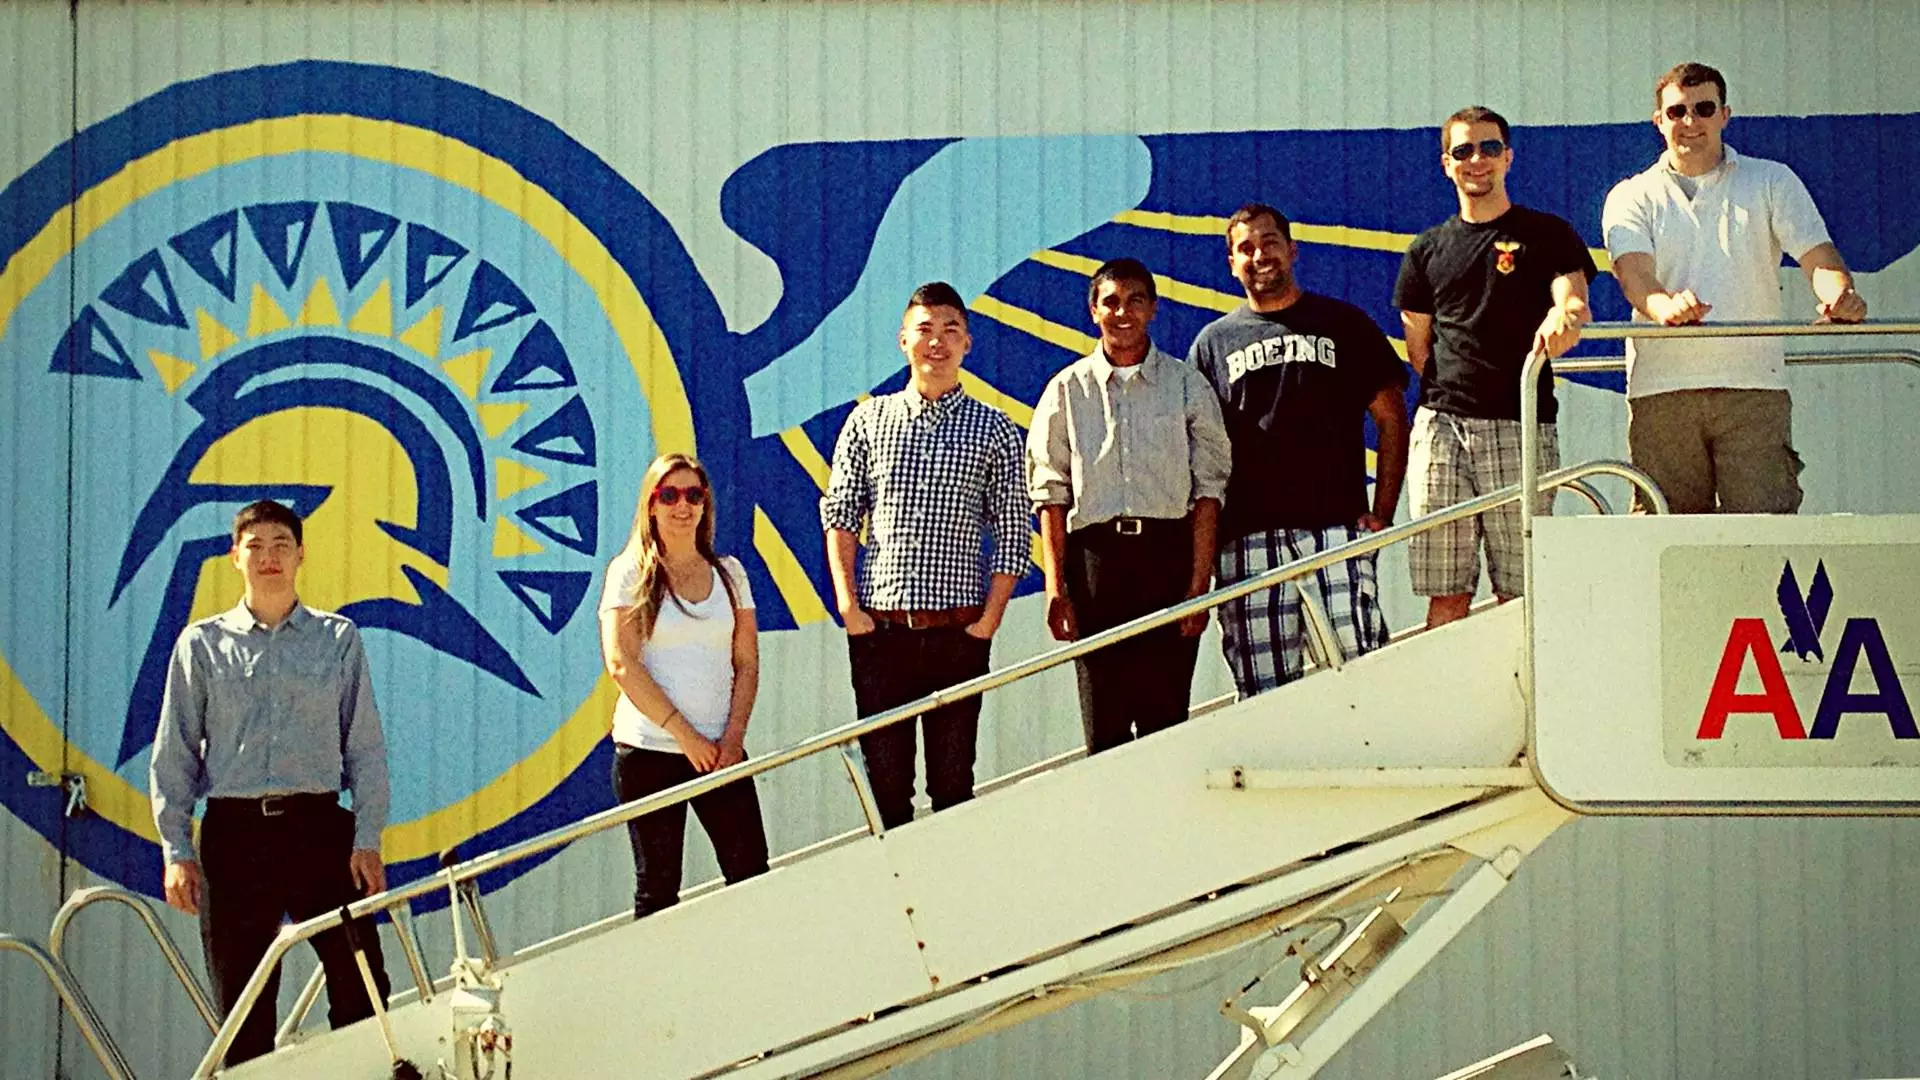 Aviation students posing on an airplane ramp.